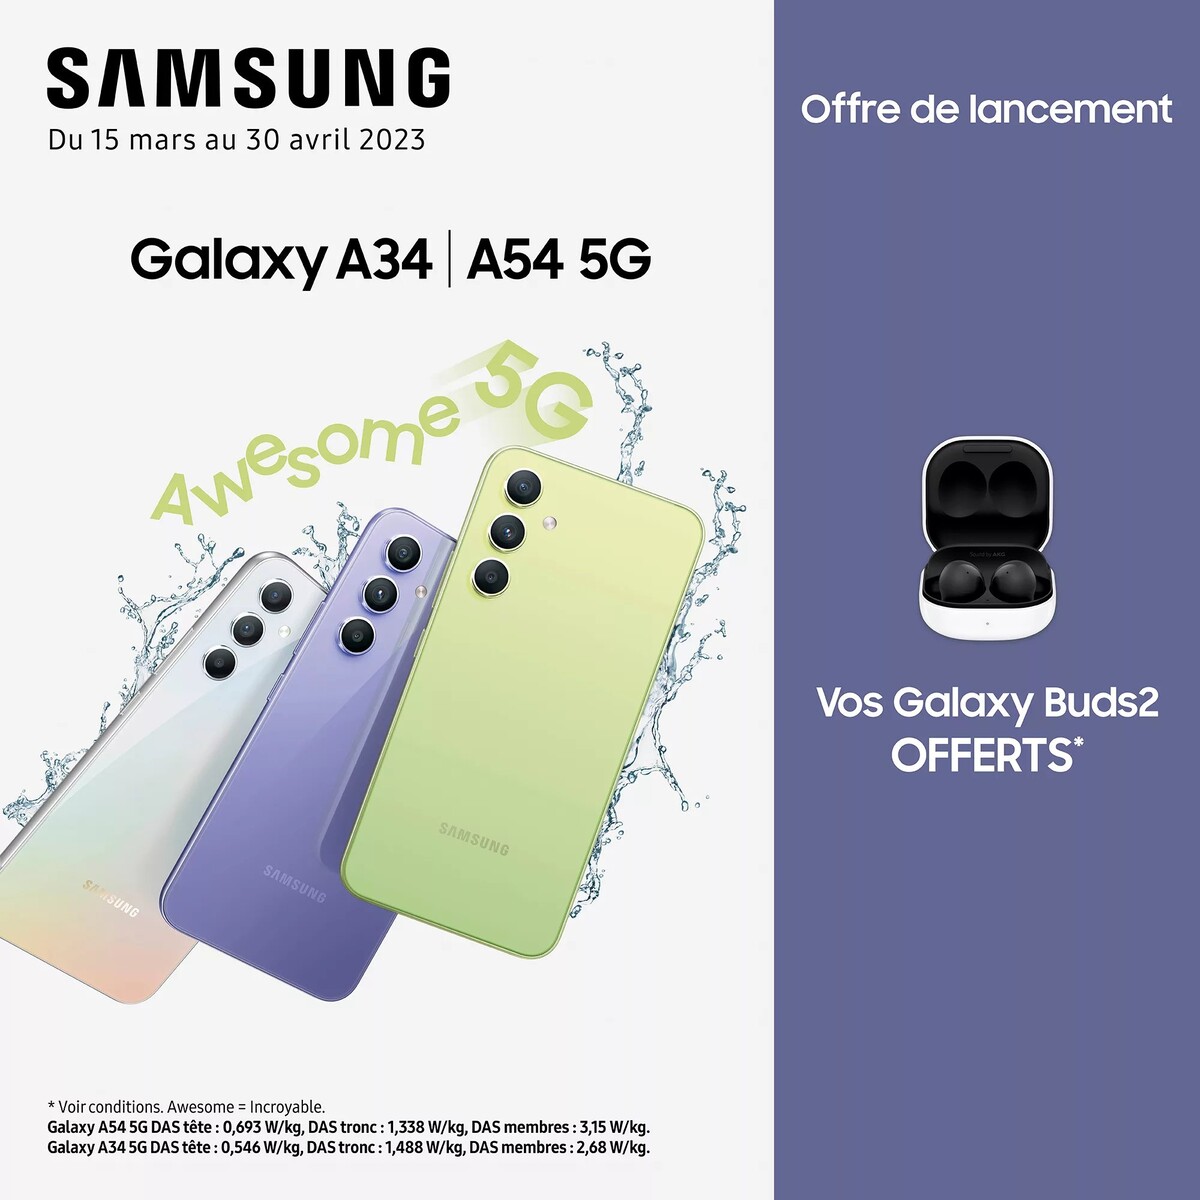 Samsung Launches the all-new Galaxy A54 5G and A34 5G with